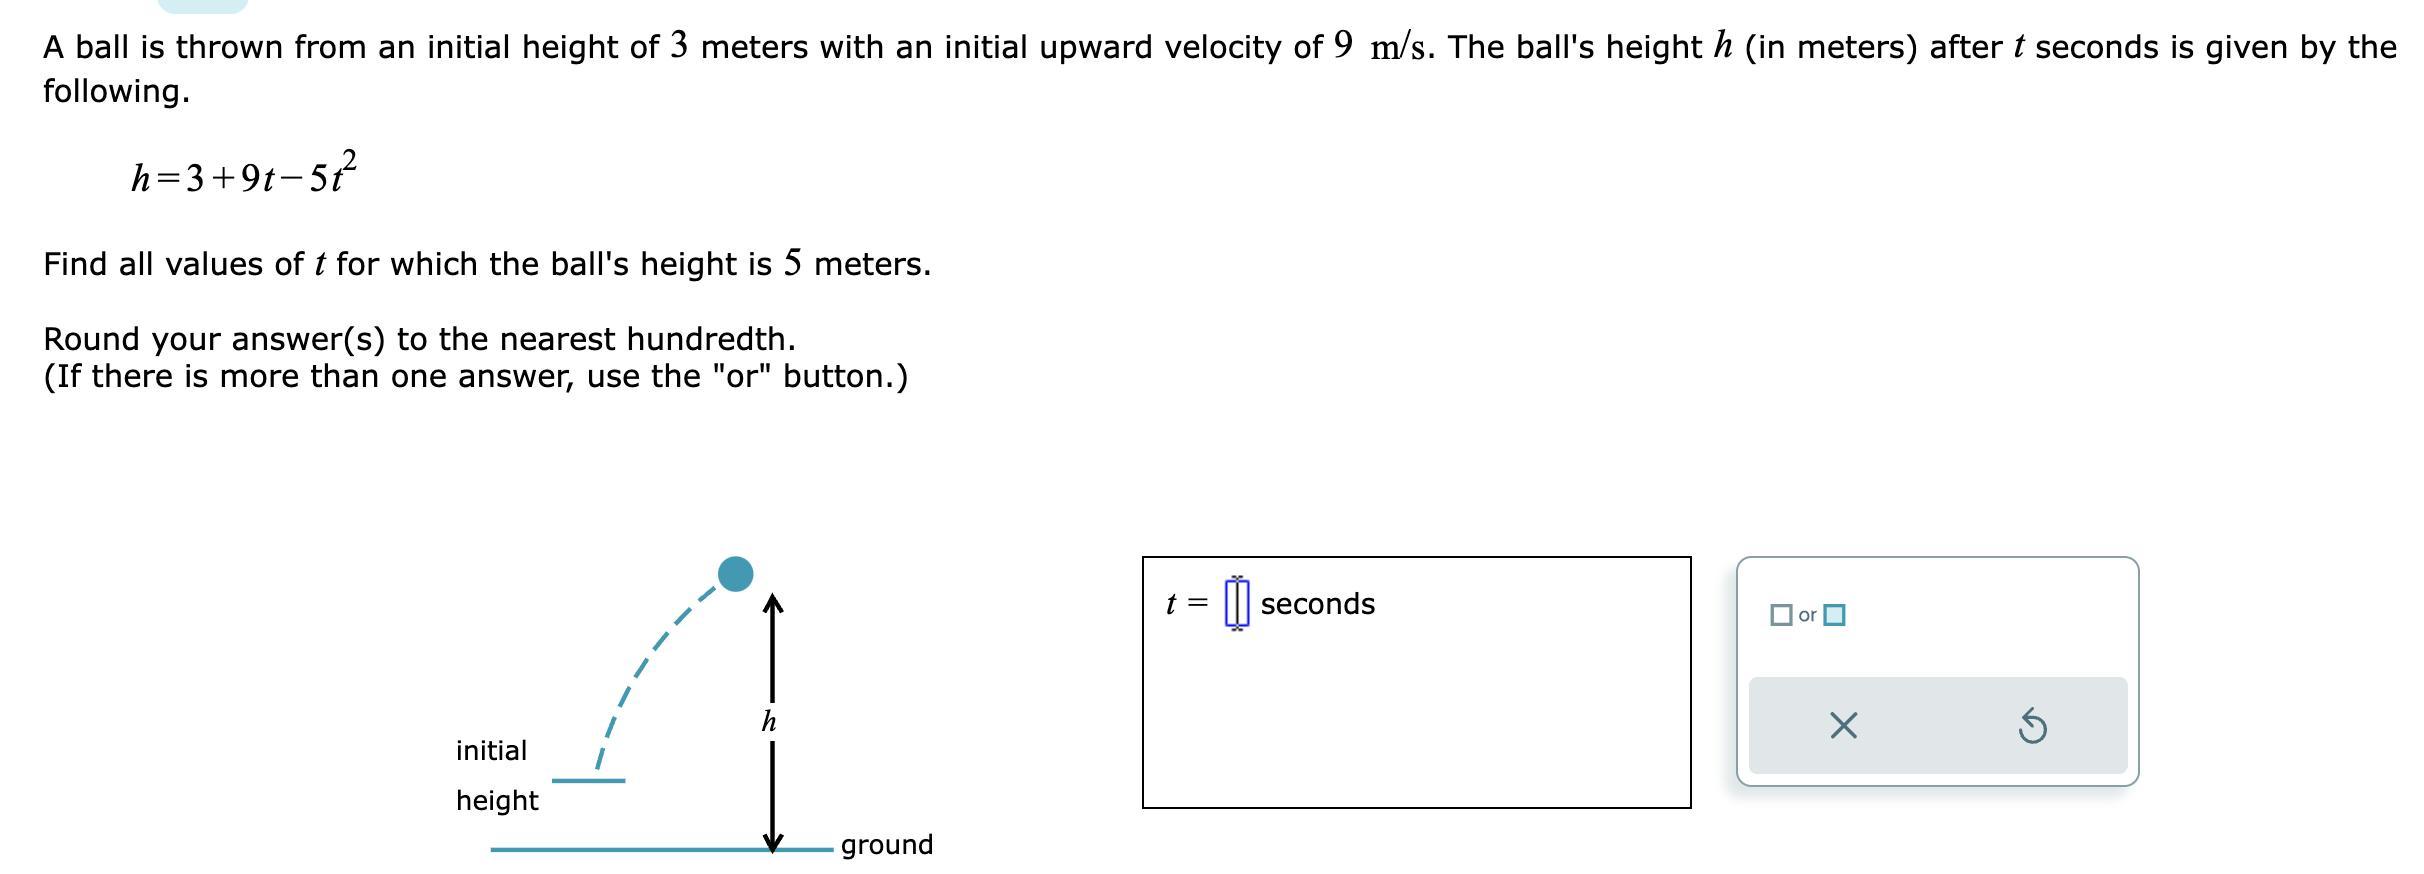 A ball is thrown from an initial height of 3 meters with an initial upward velocity of ( 9 mathrm{~m} / mathrm{s} ). The